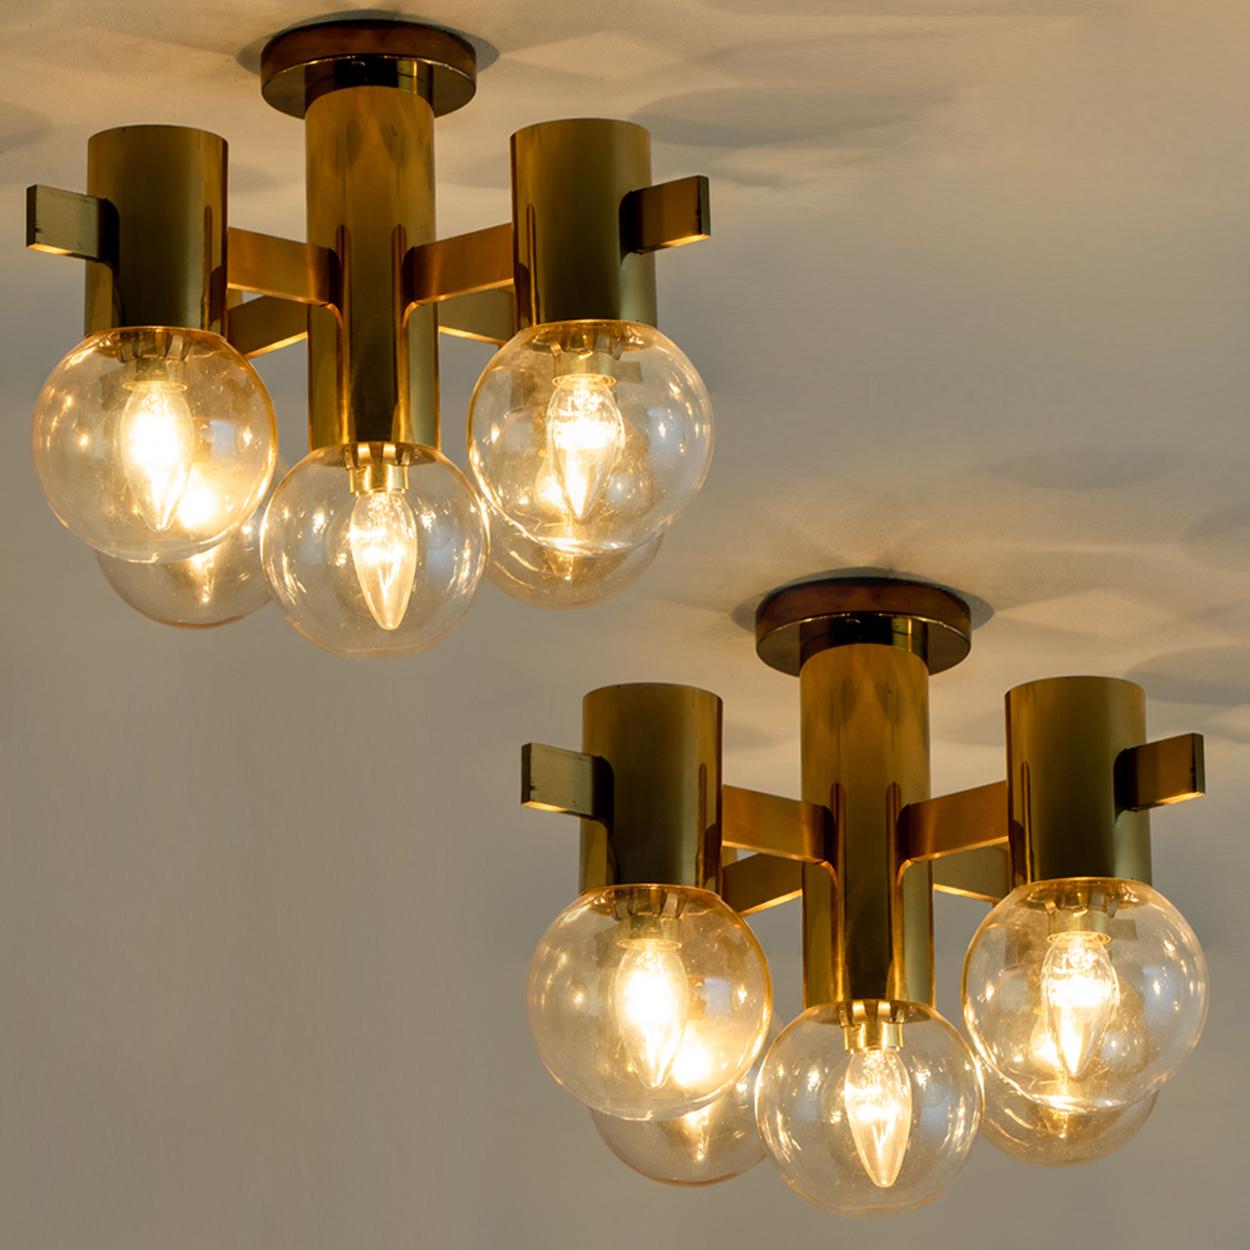 German Pair of Brass and Glass Light Fixtures in the Style of Jakobsson, 1960s For Sale